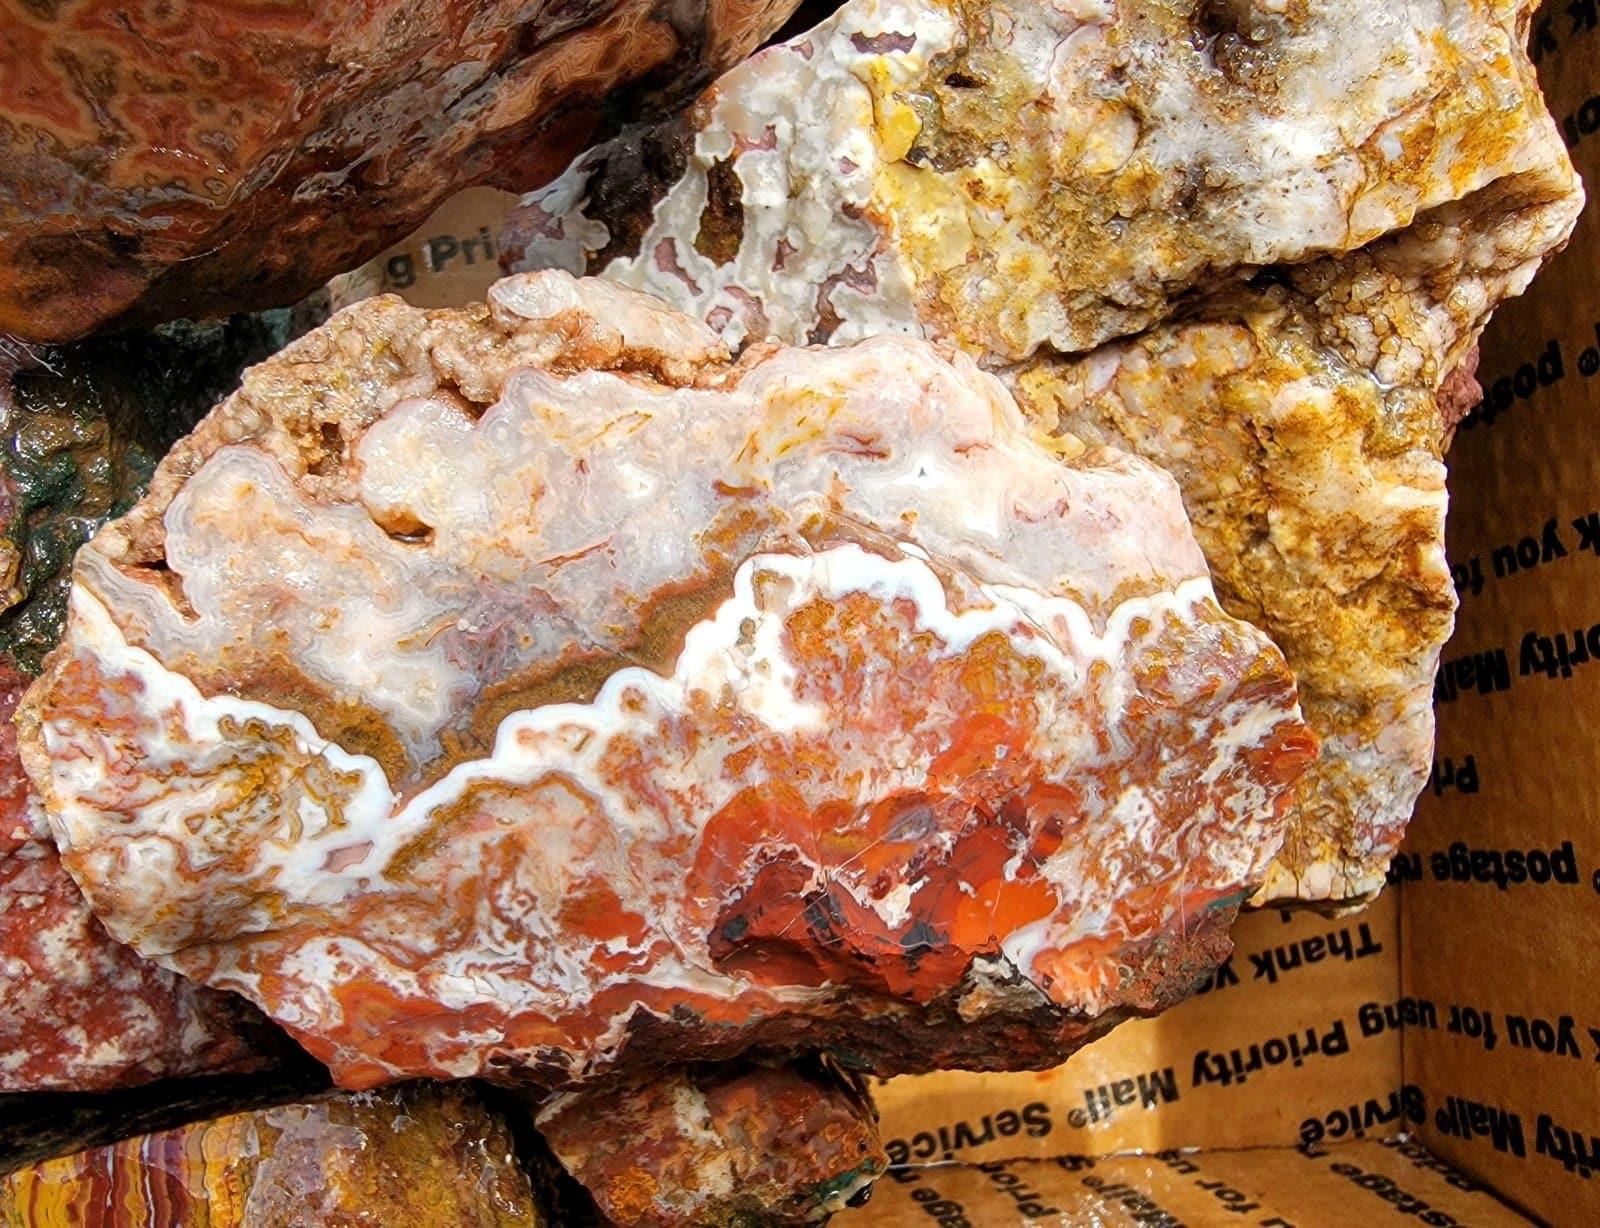 Apple Valley Agate Cutting Rough Flatrate! - LapidaryCentral